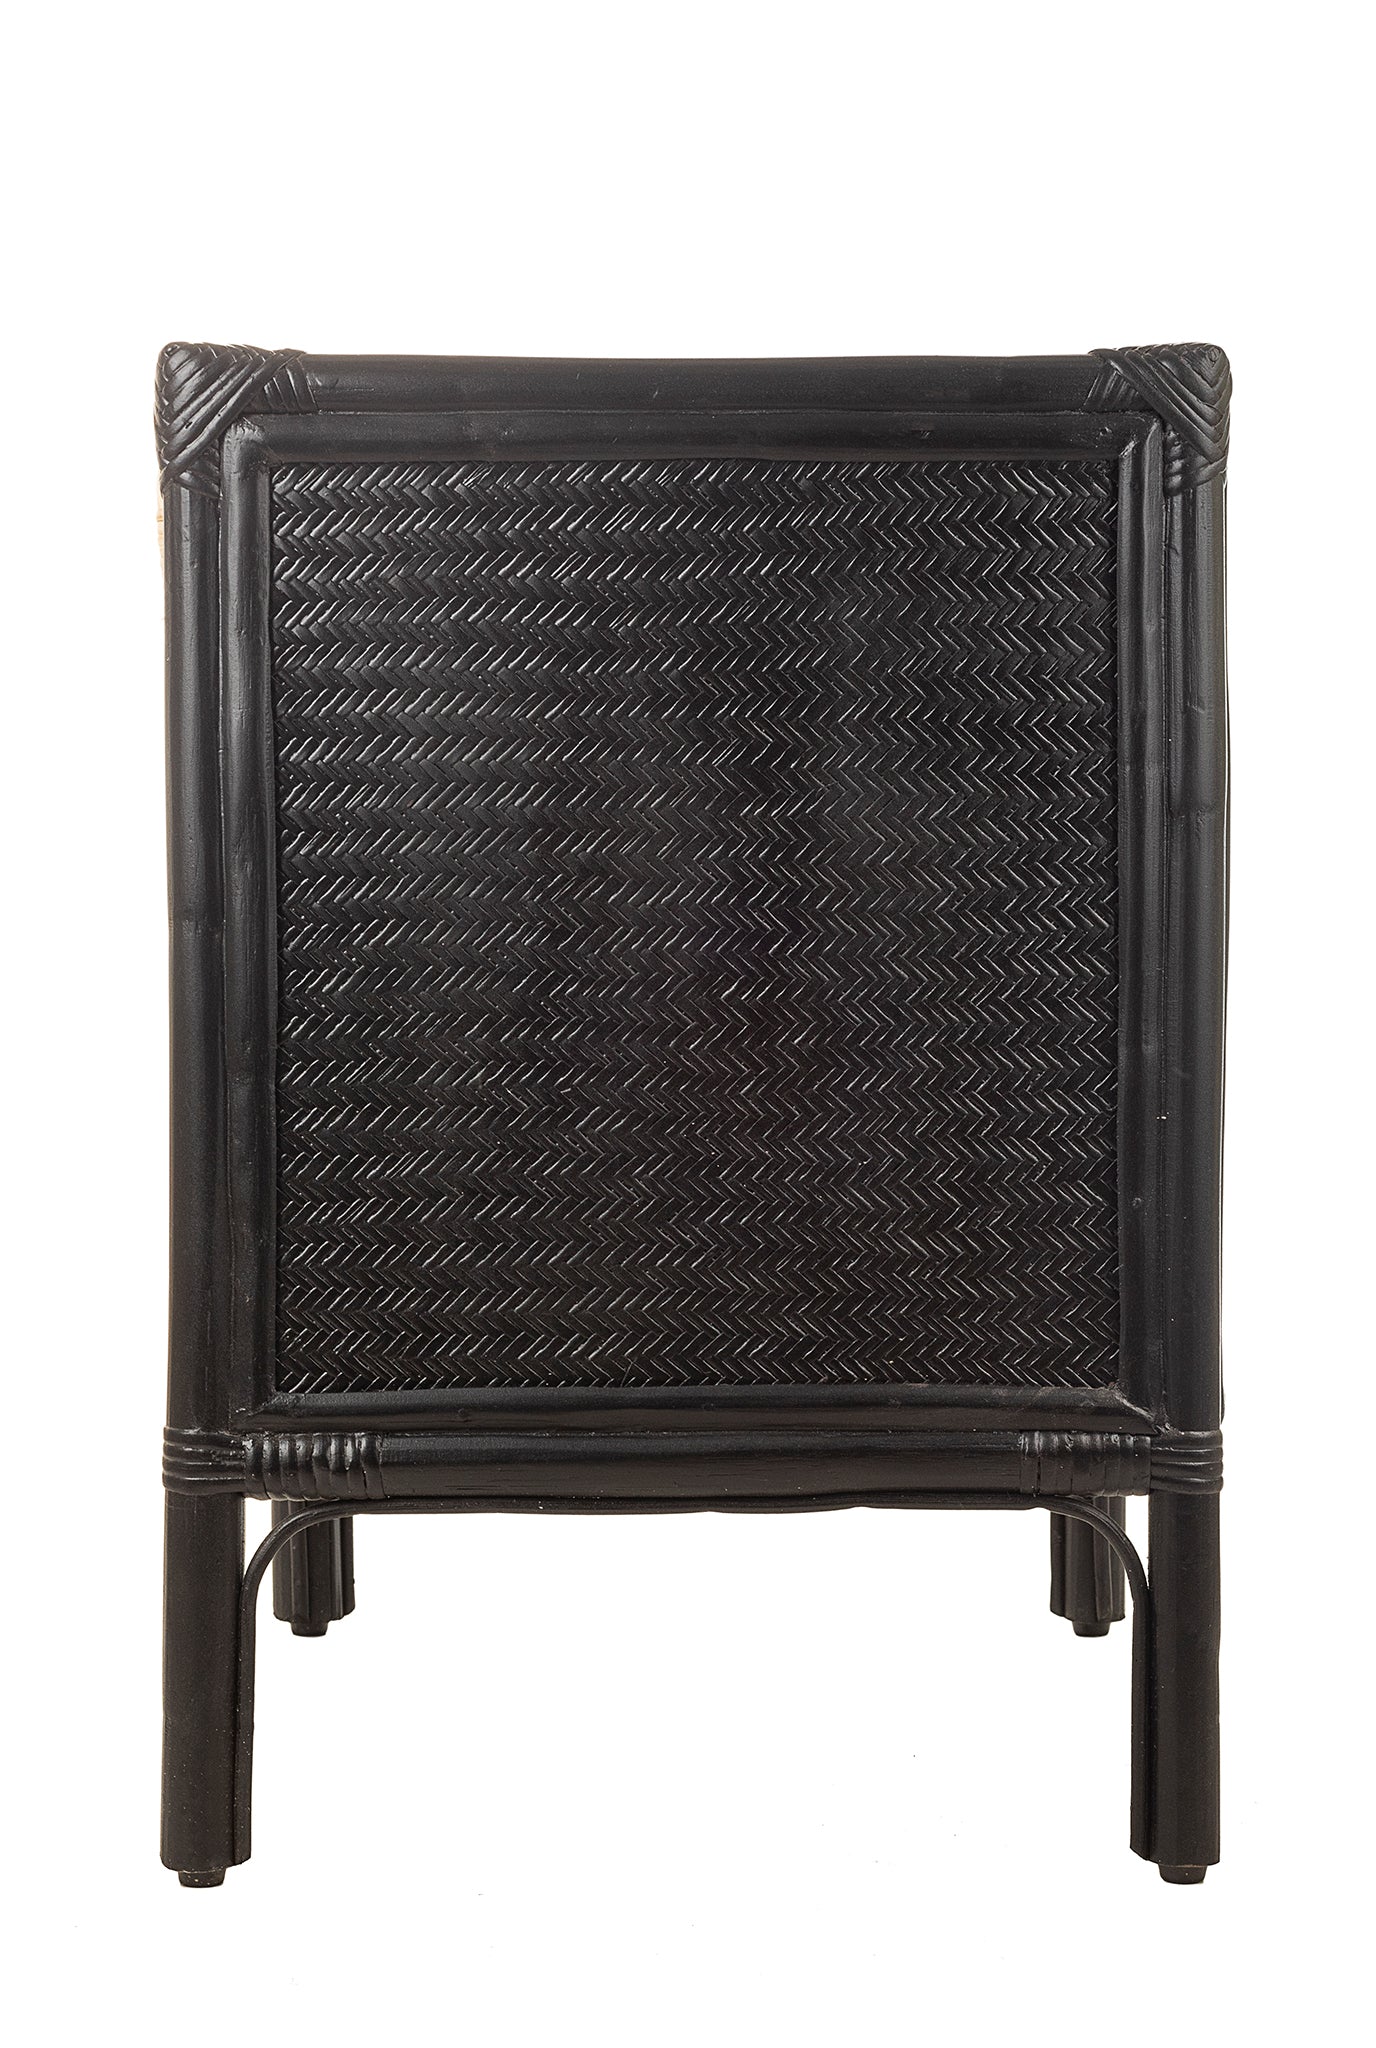 jodi- sustainable-black frame-cane weaving-handcrafted-side table